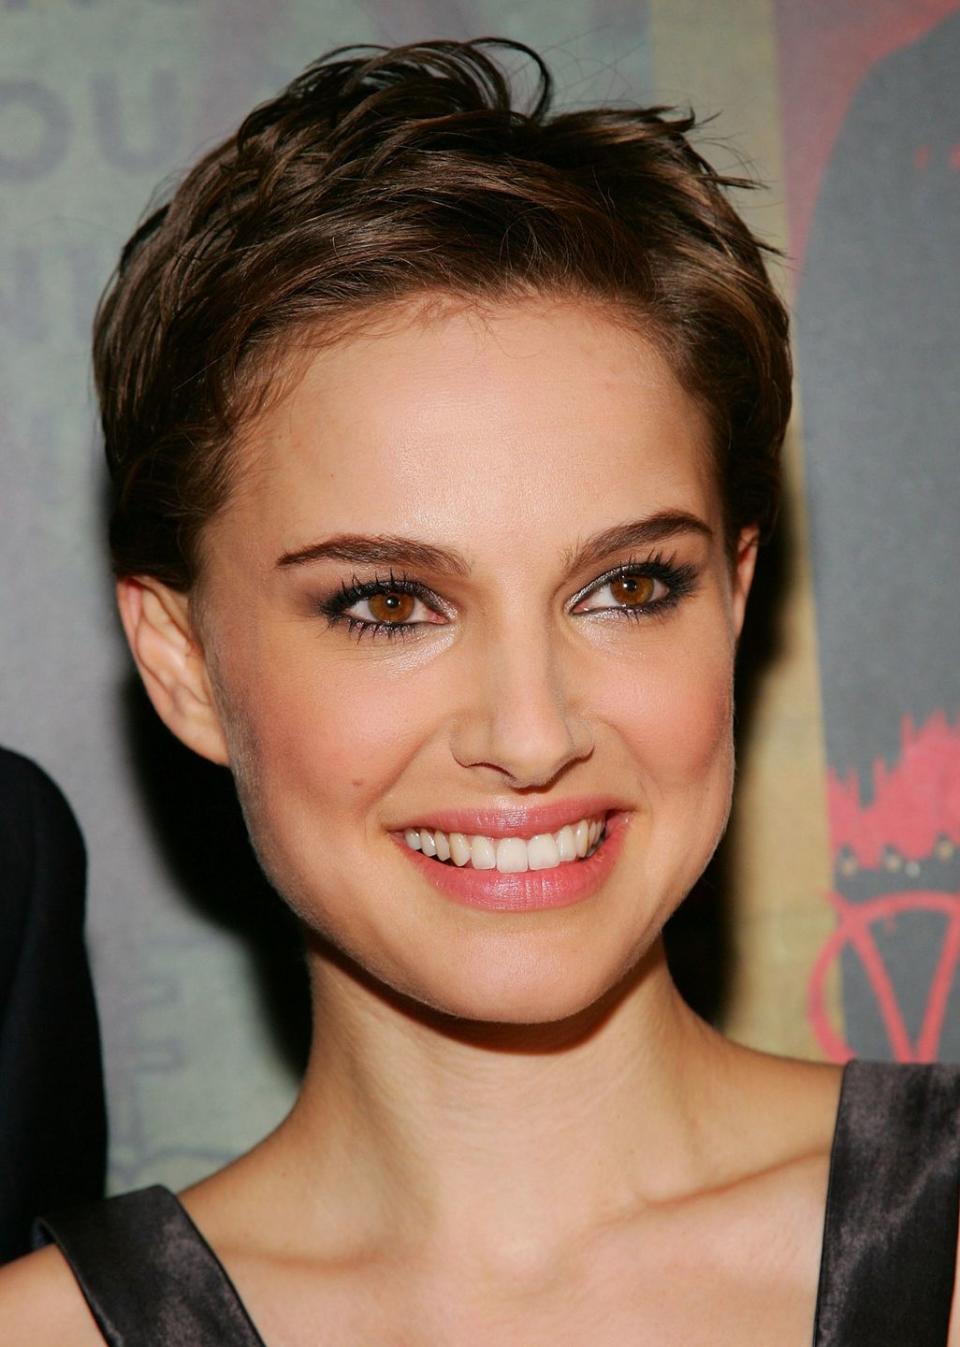 <p>Pixie cuts can make your hair appear thicker and create a voluminous image. Actress <strong>Natalie Portman</strong> styled her's with choppy layers for maximum dimension. </p>